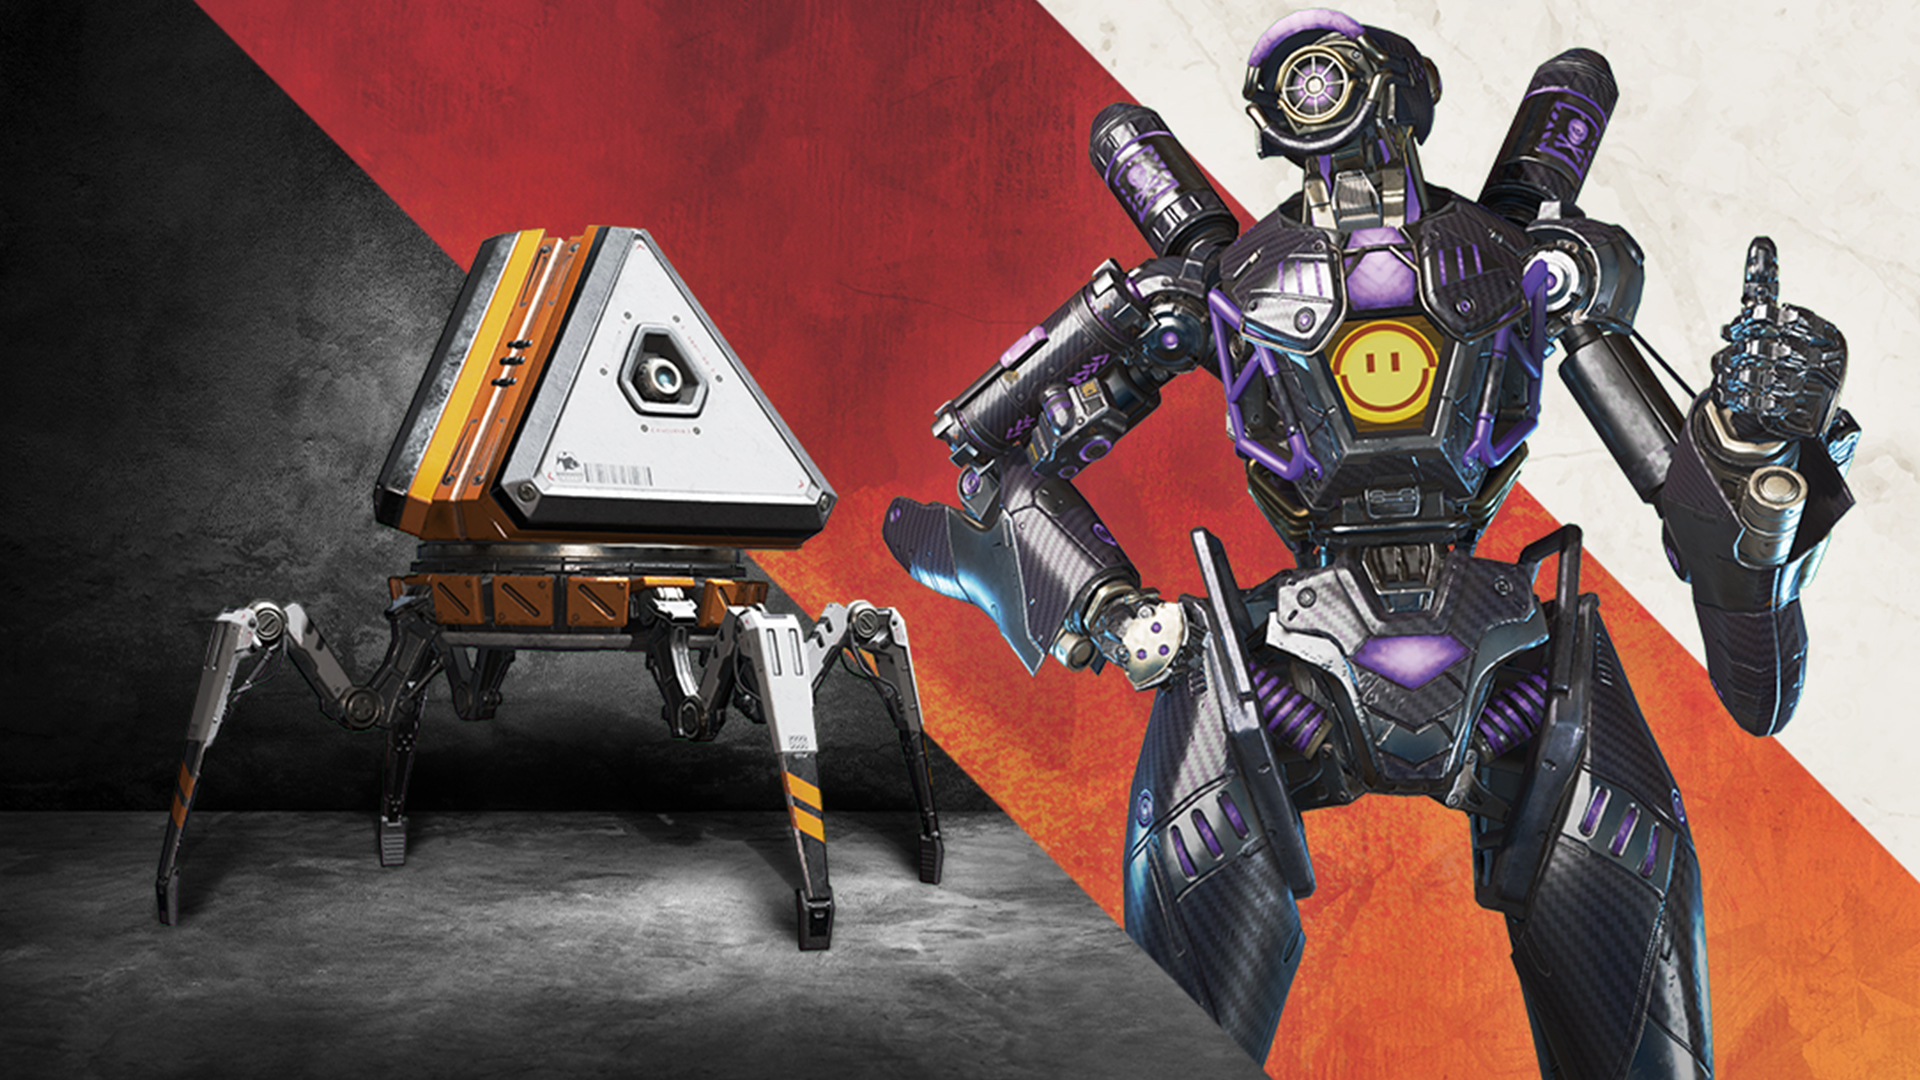 Available with Twitch Prime now: Drop into some new Apex Legends loot,  featuring an exclusive skin…